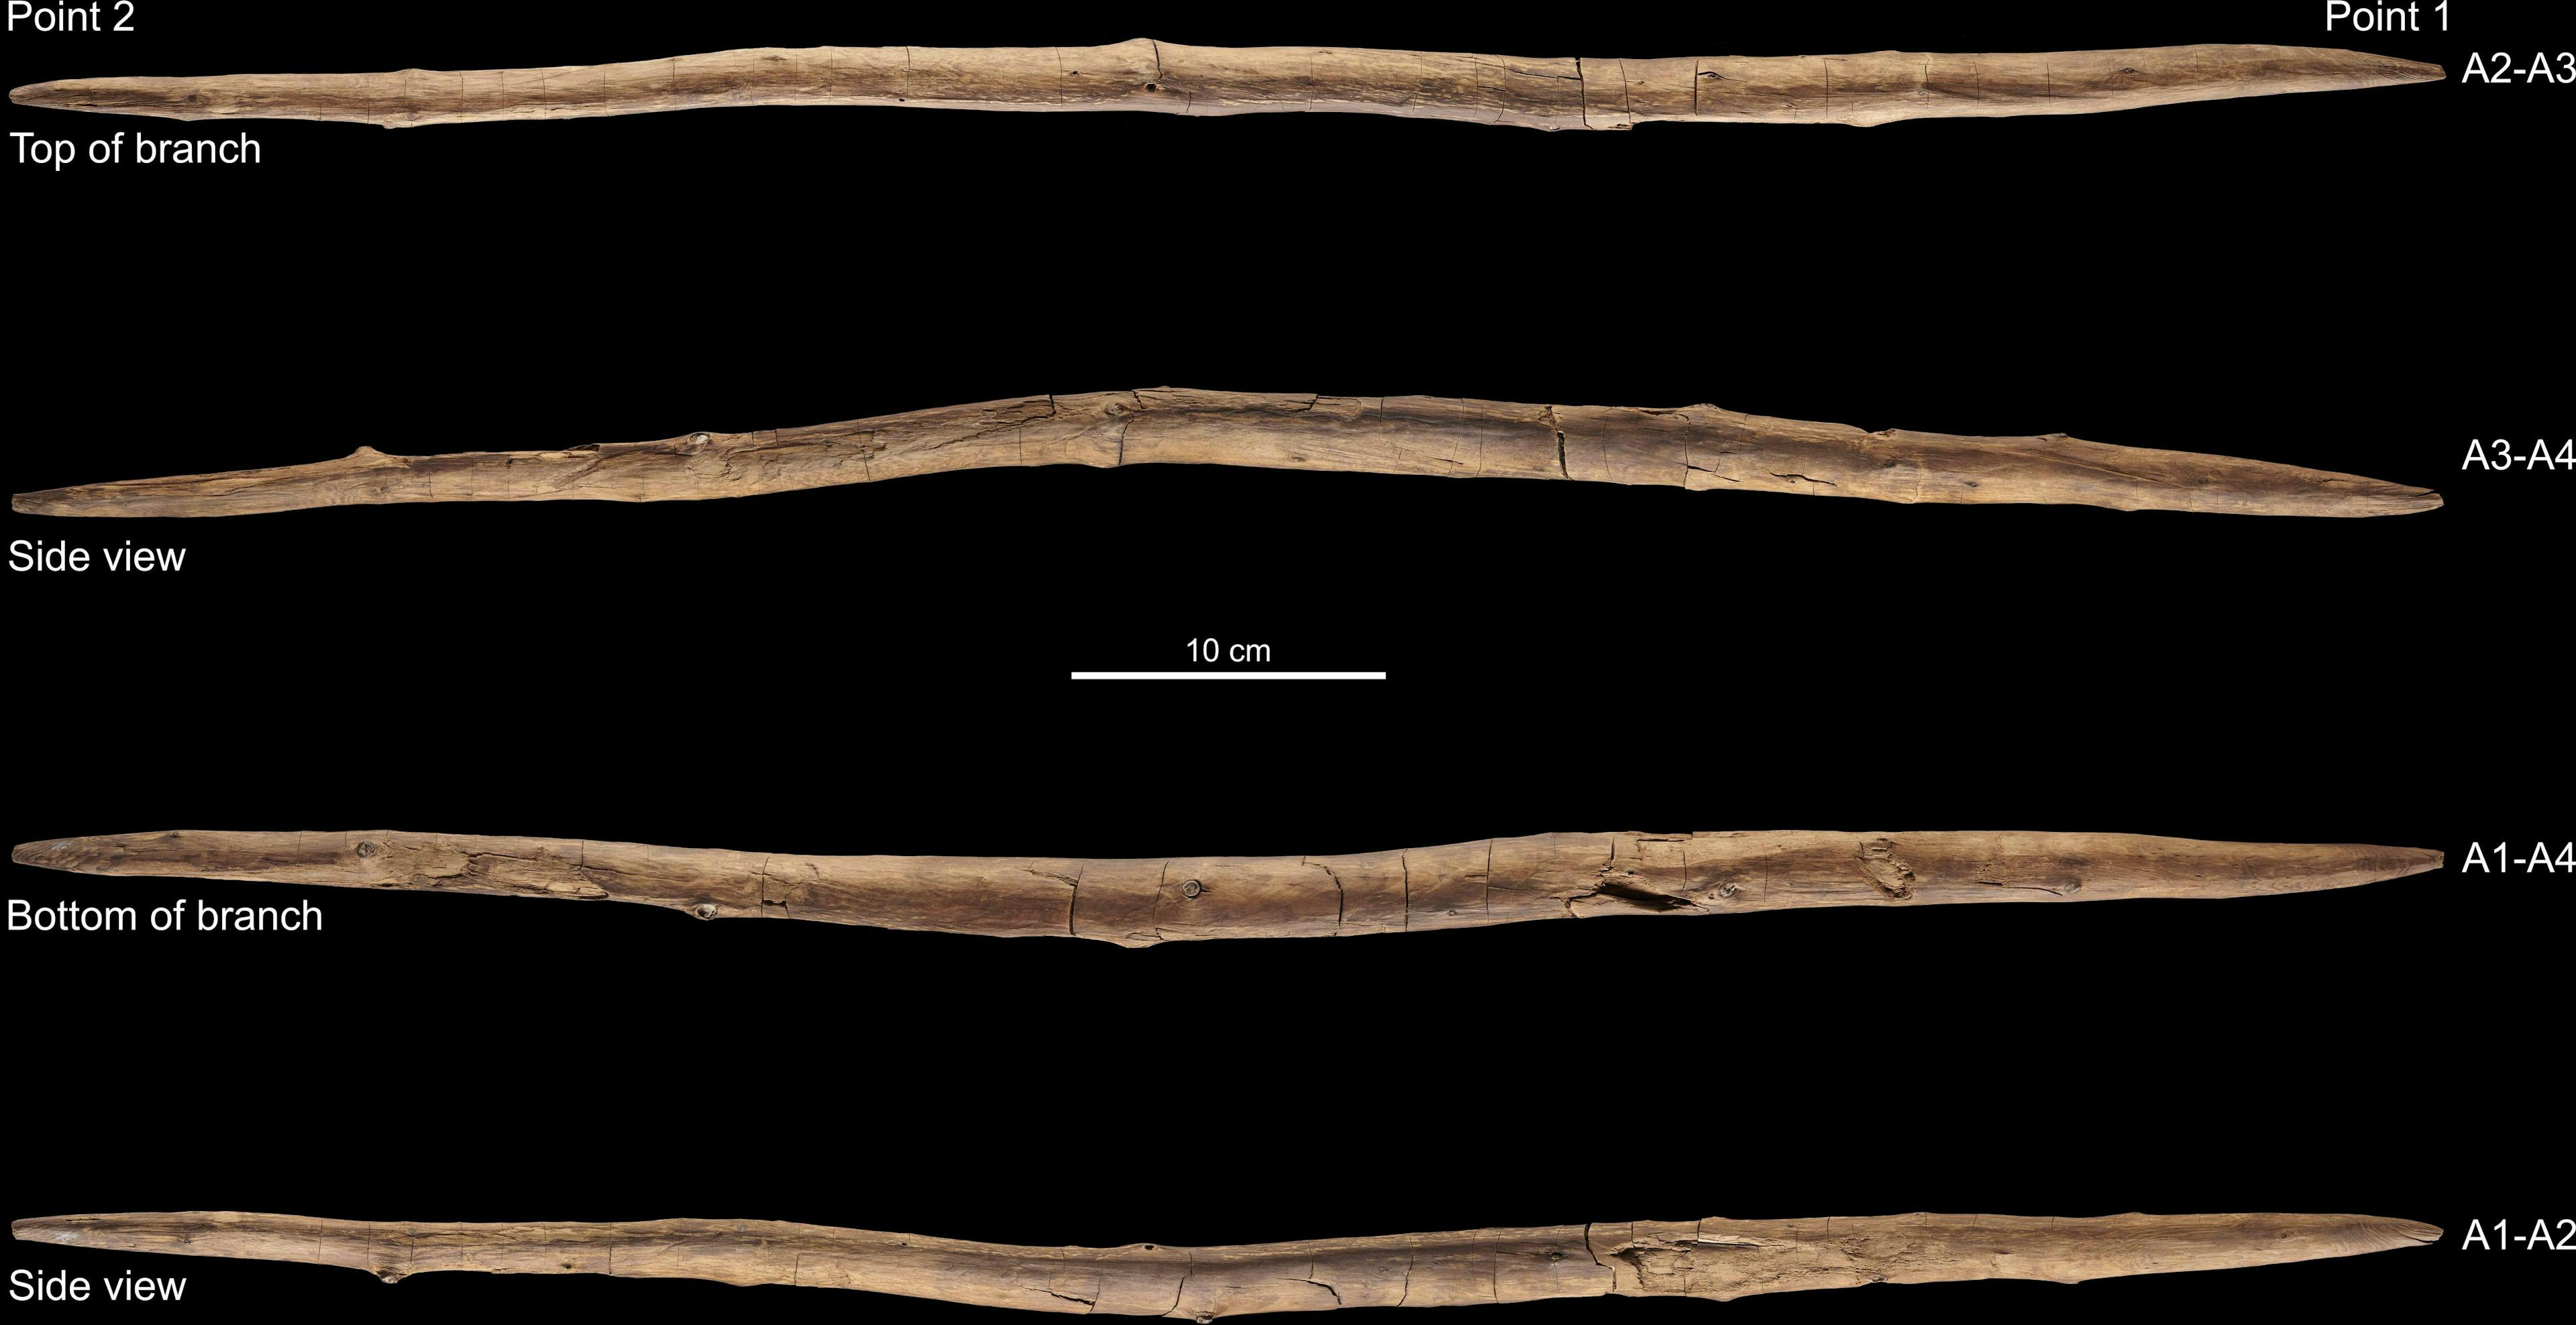 Overview photo of the double-pointed stick. | Image Credit: © Volker Minkus - CC BY 4.0